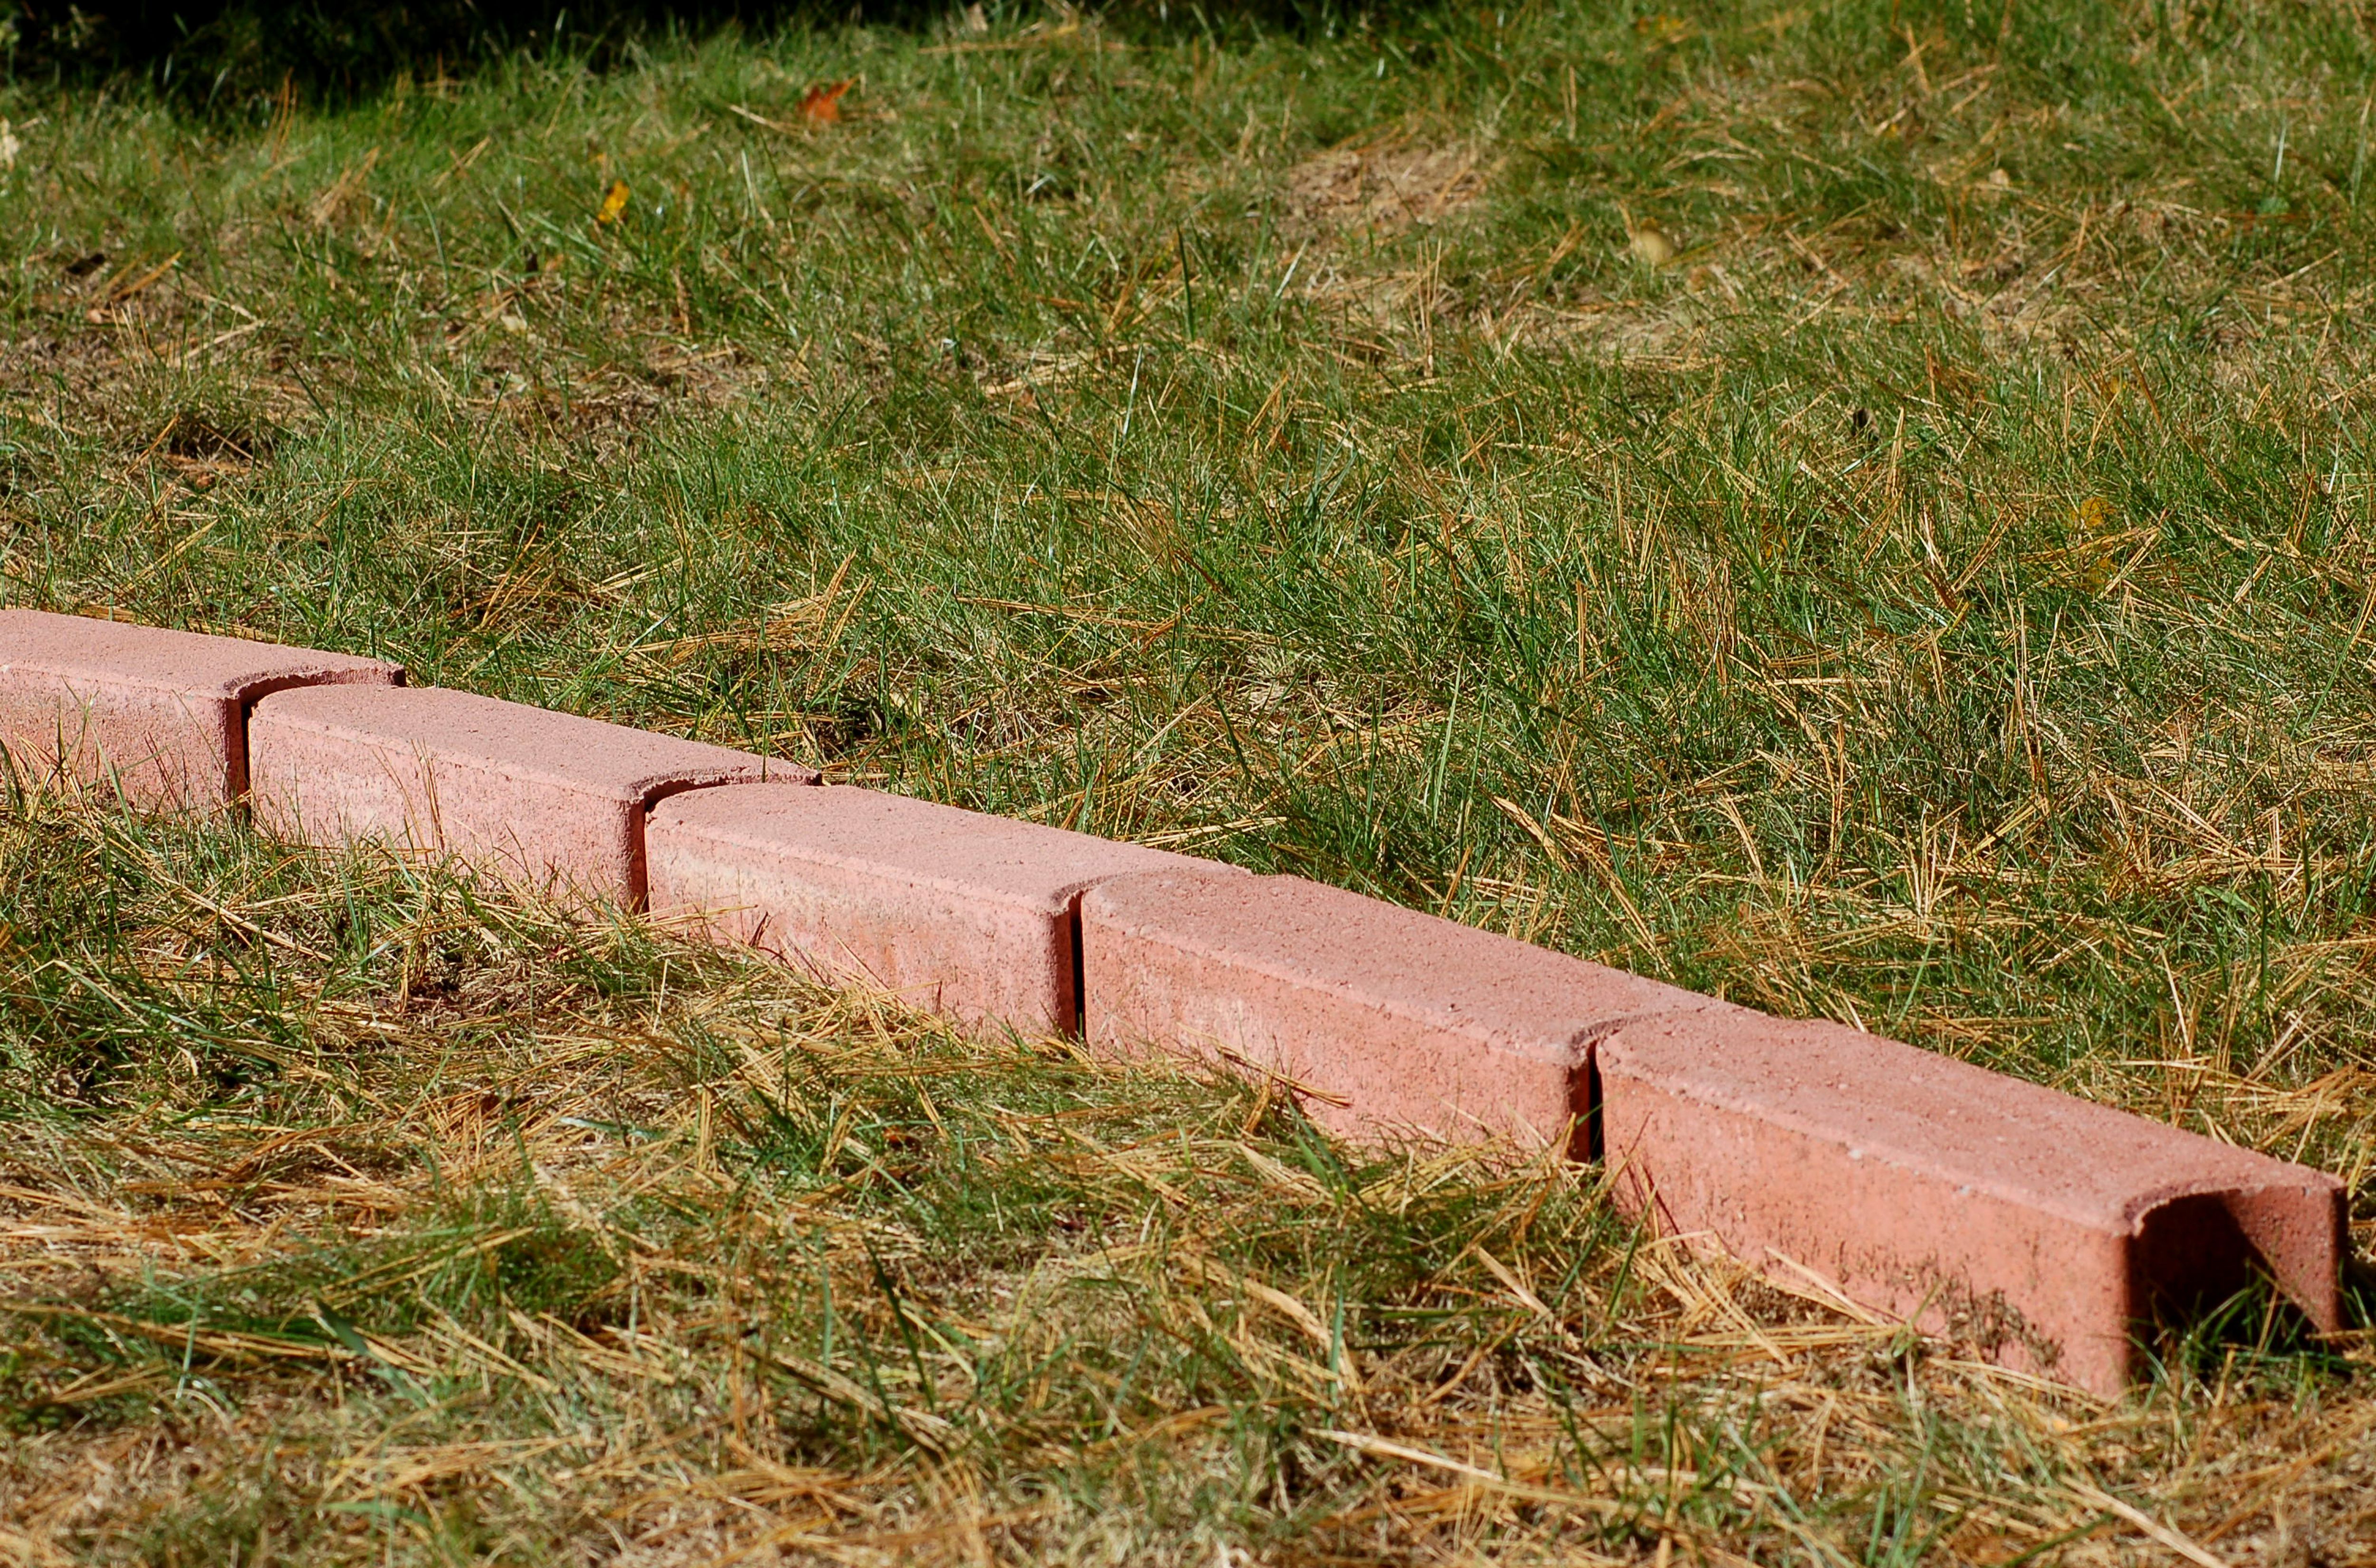 How To Install Lawn Edging Pavers To Make A Mowing Strip